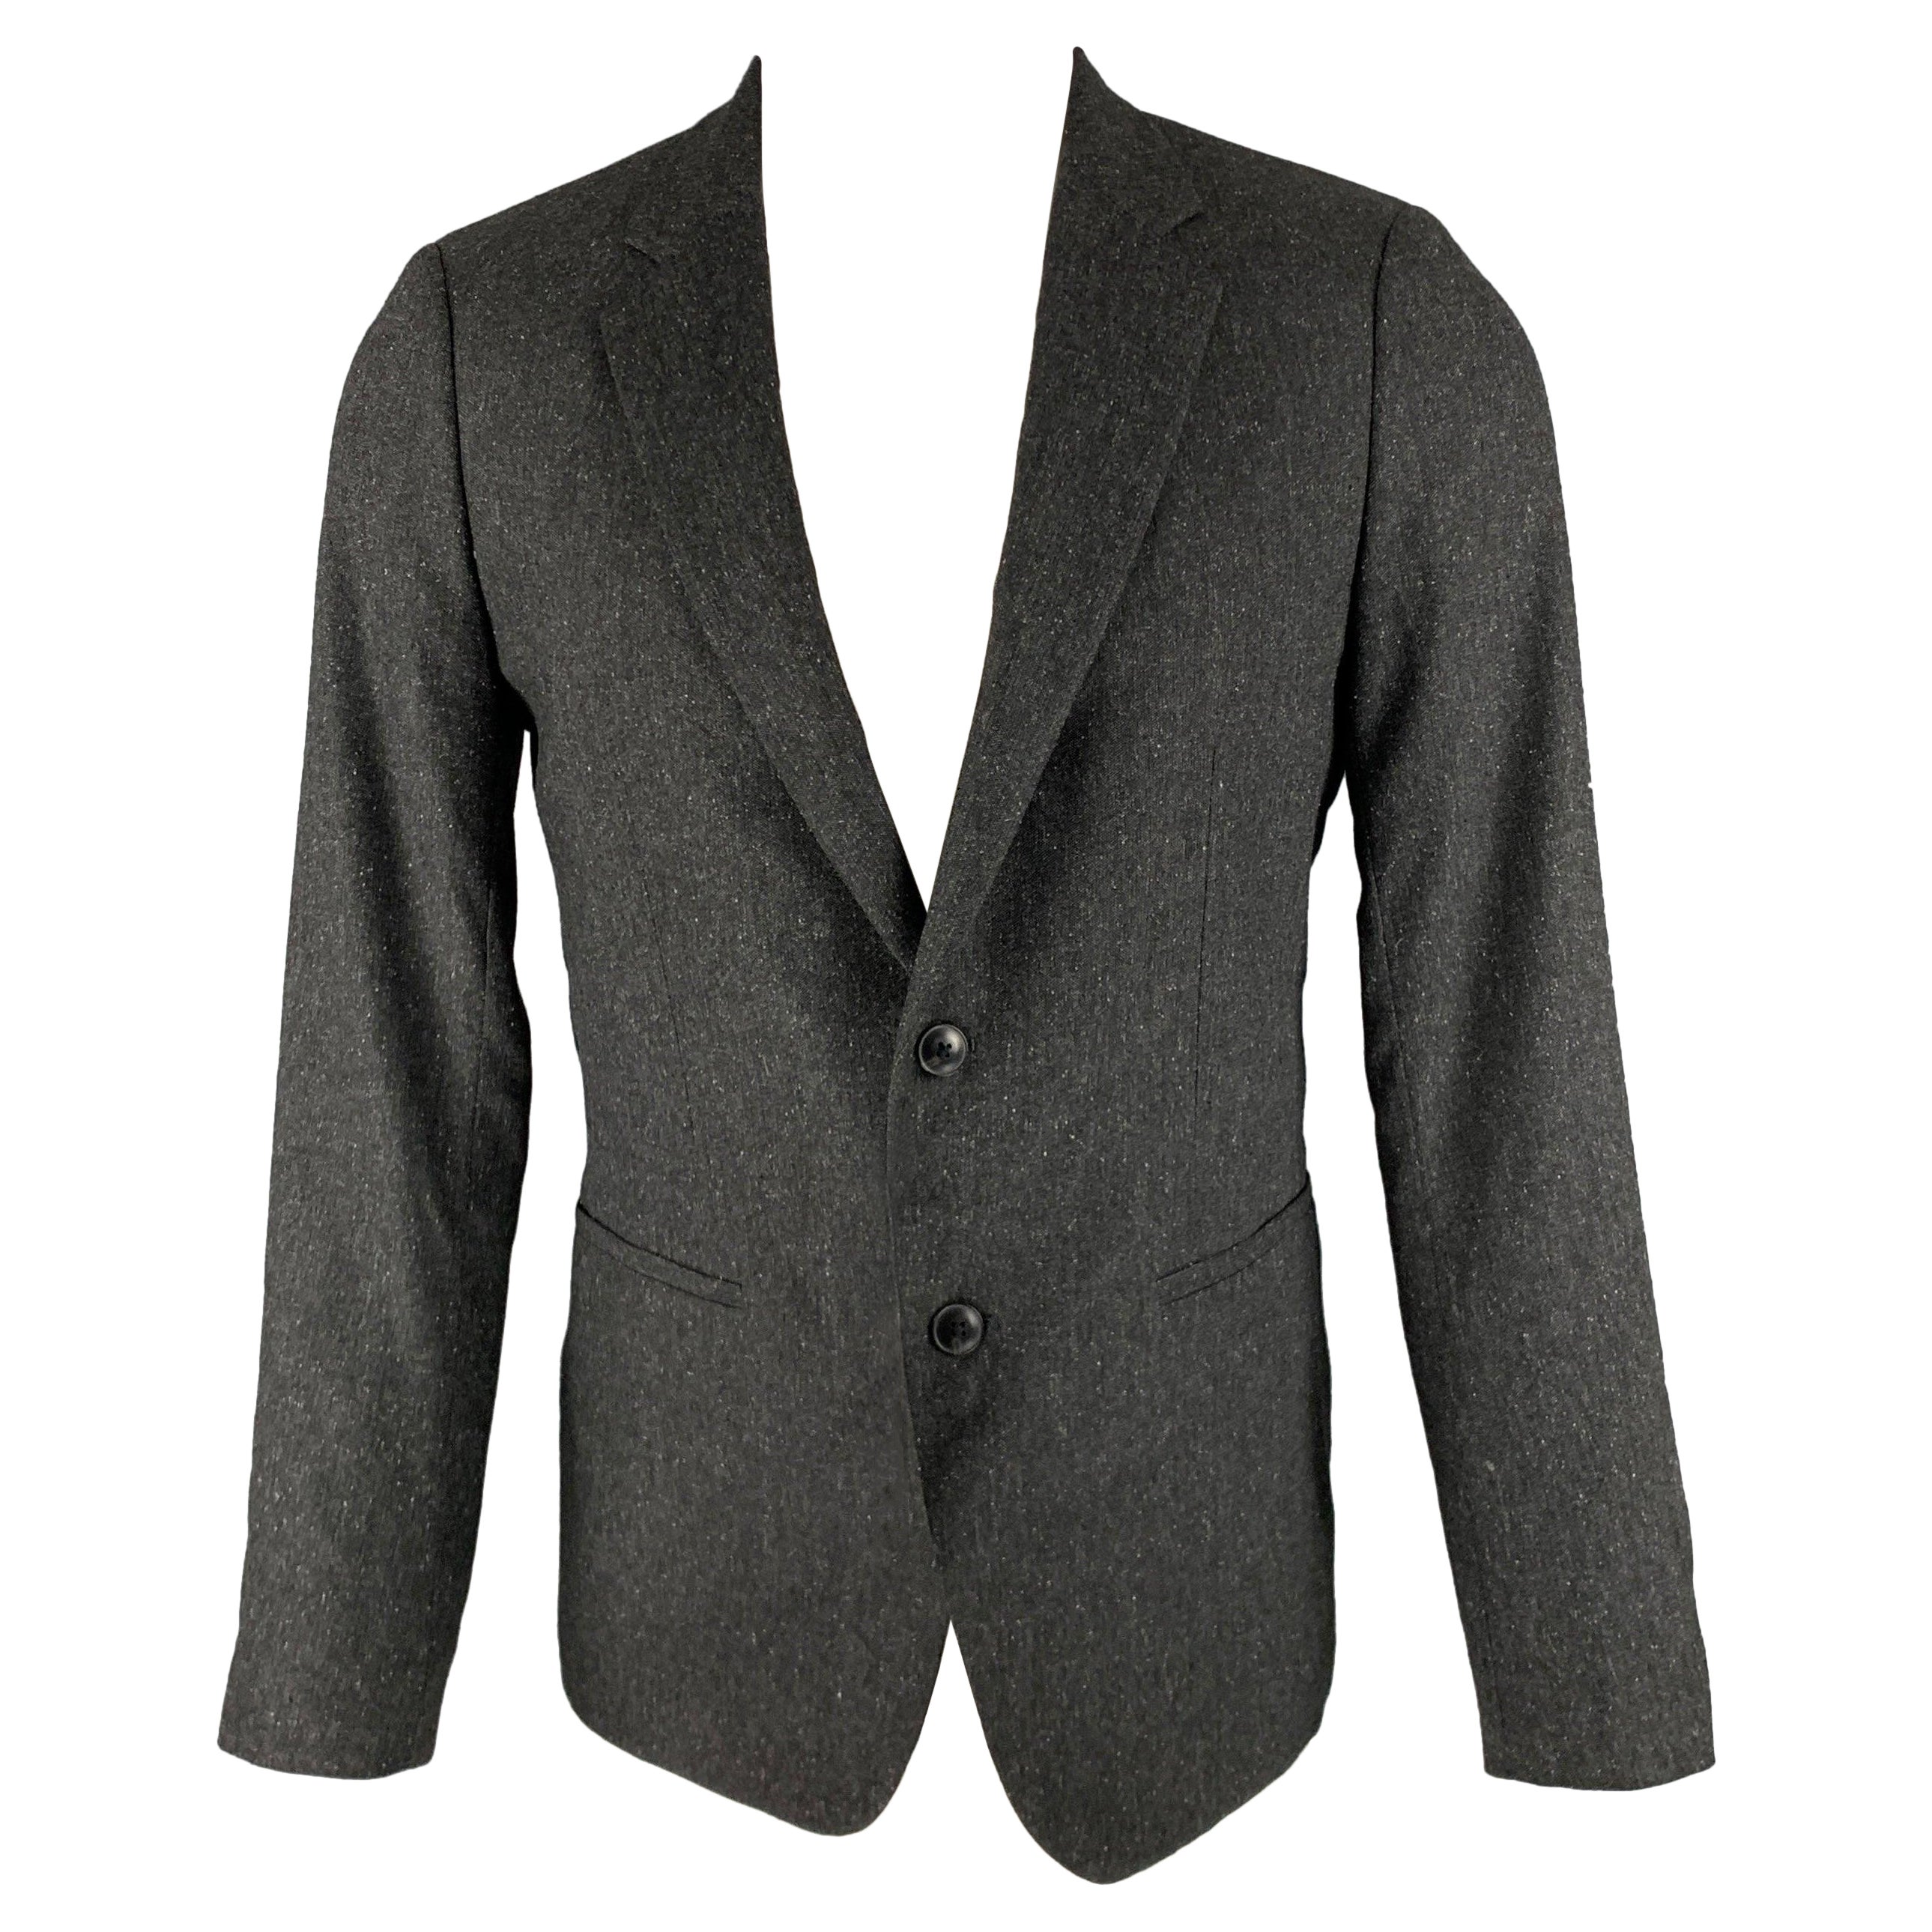 THEORY Size 38 Charcoal Heather Wool Blend Notch Lapel Sport Coat For Sale